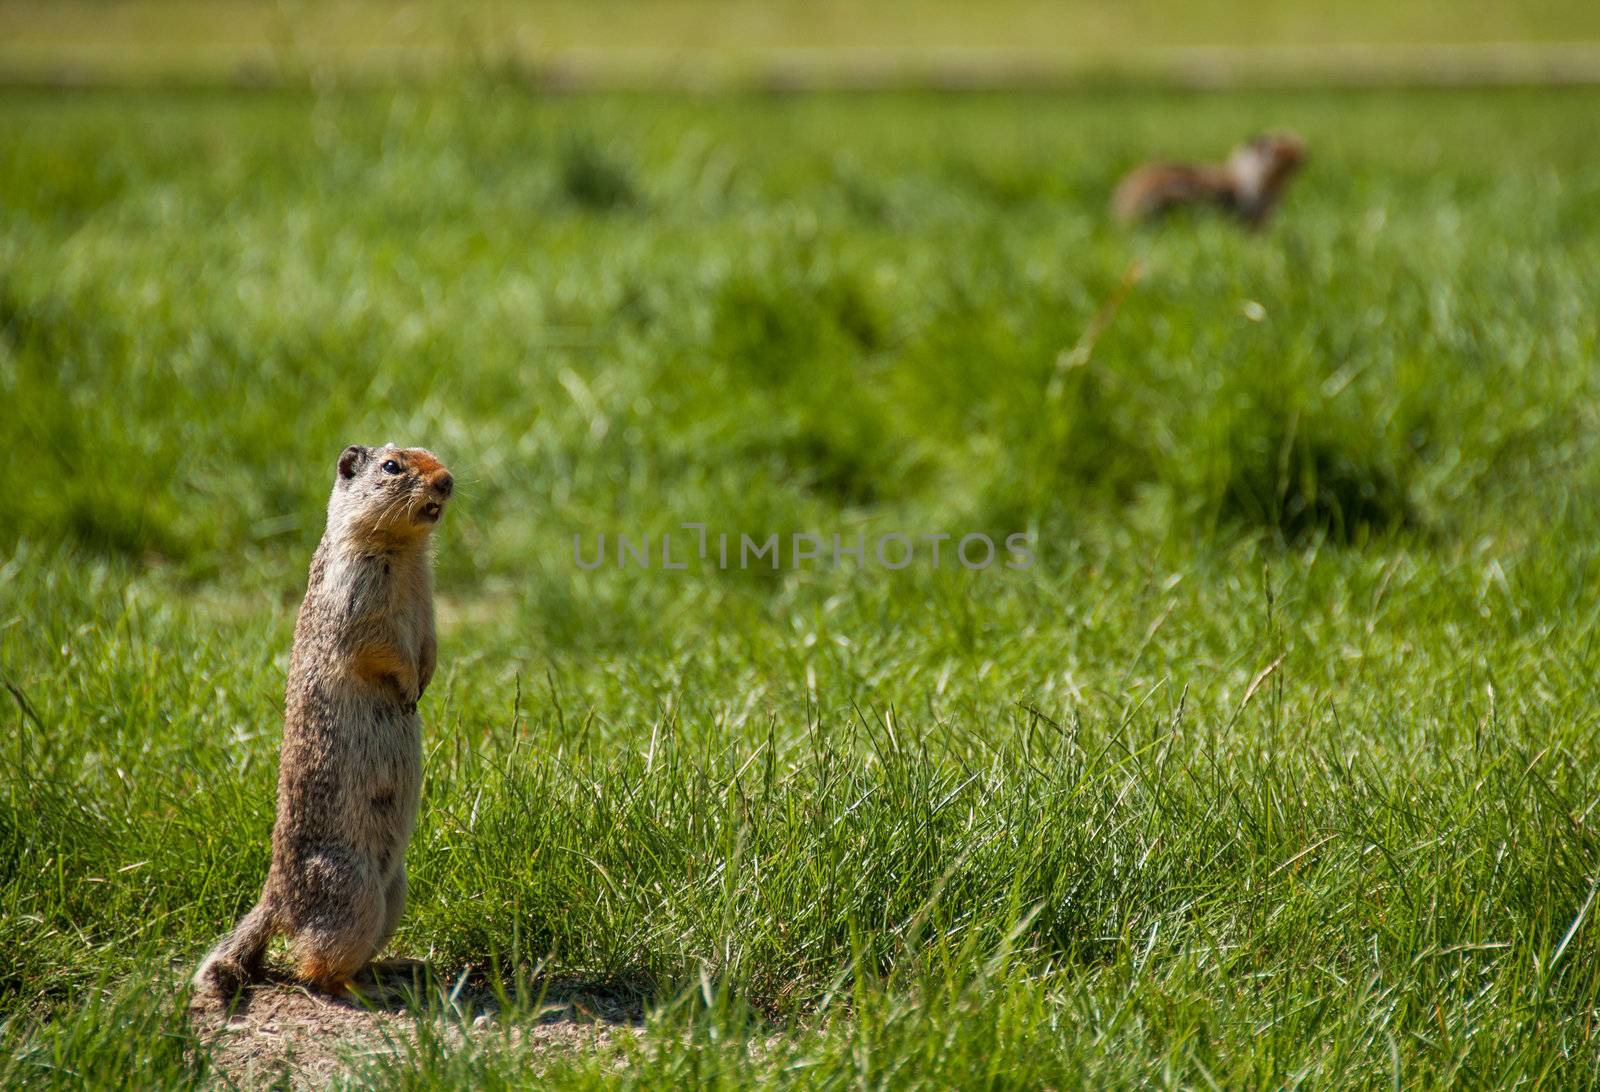 Marmot Calling Out to Other Prairie Dogs by JamesWheeler